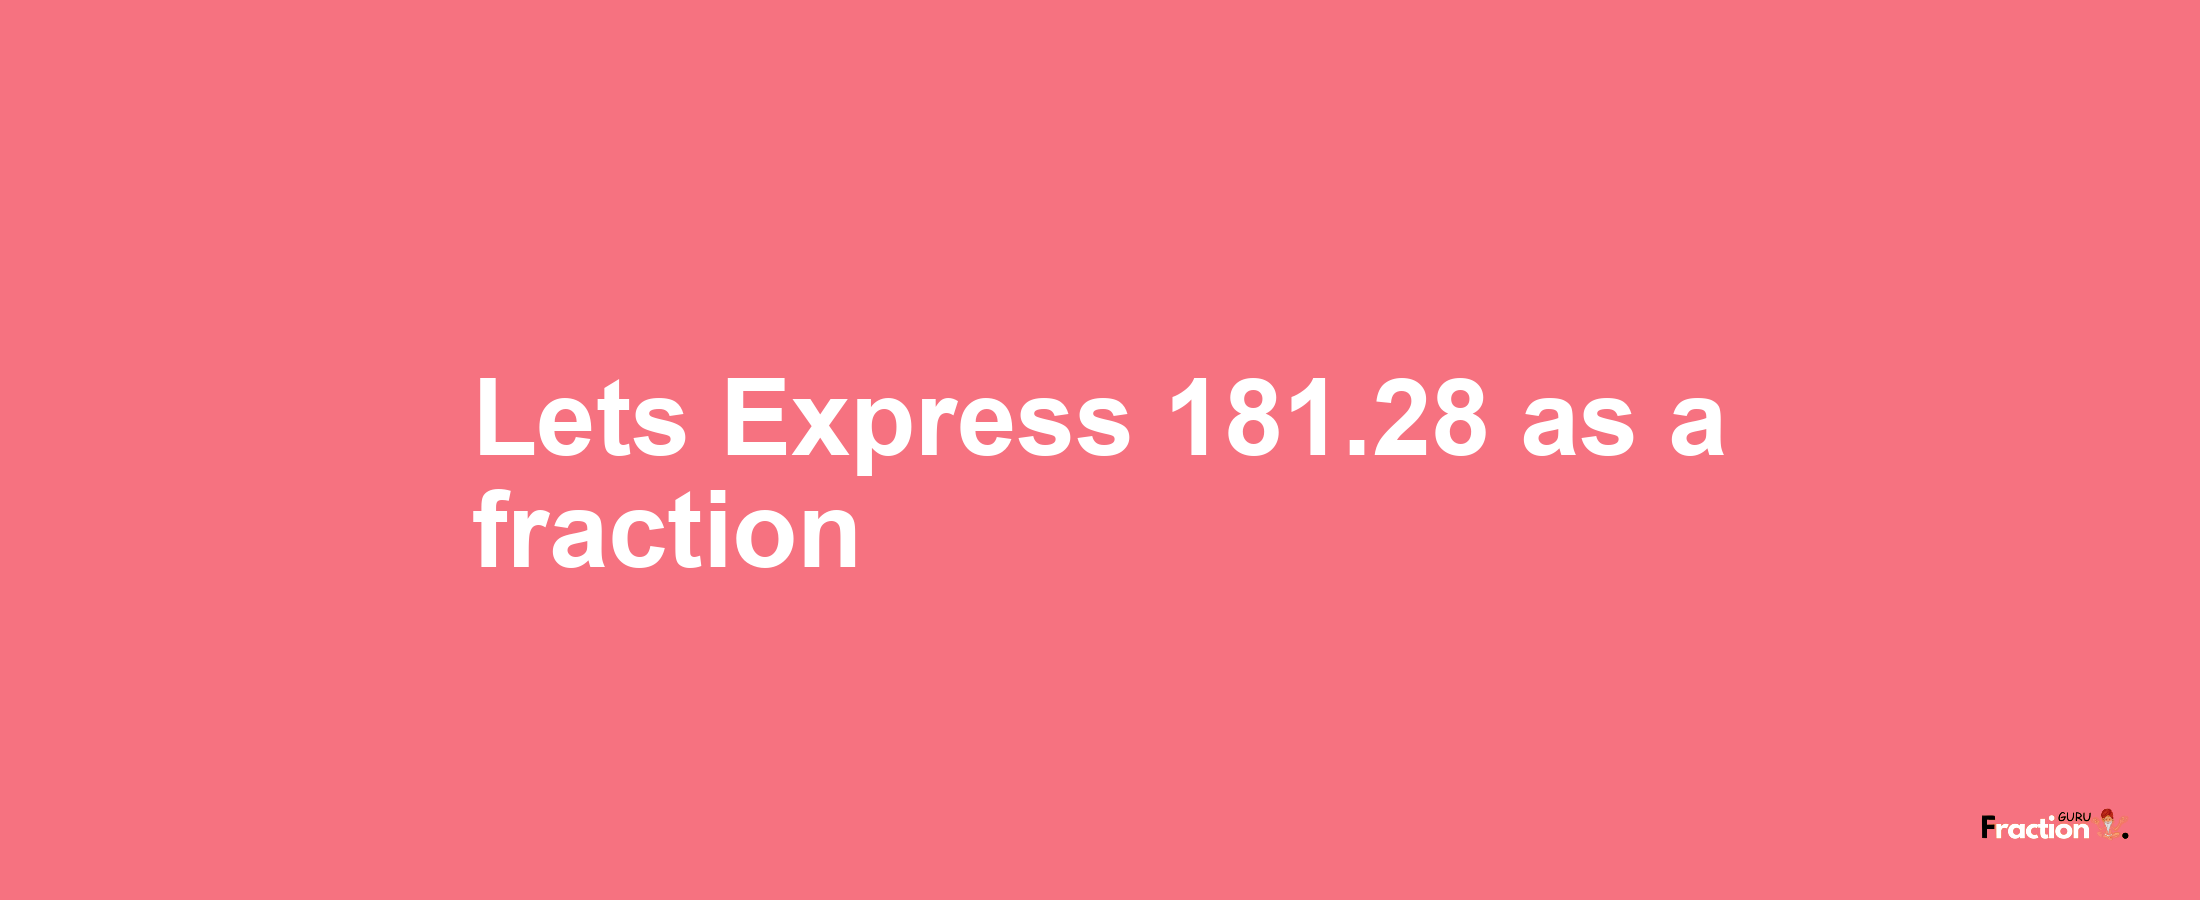 Lets Express 181.28 as afraction